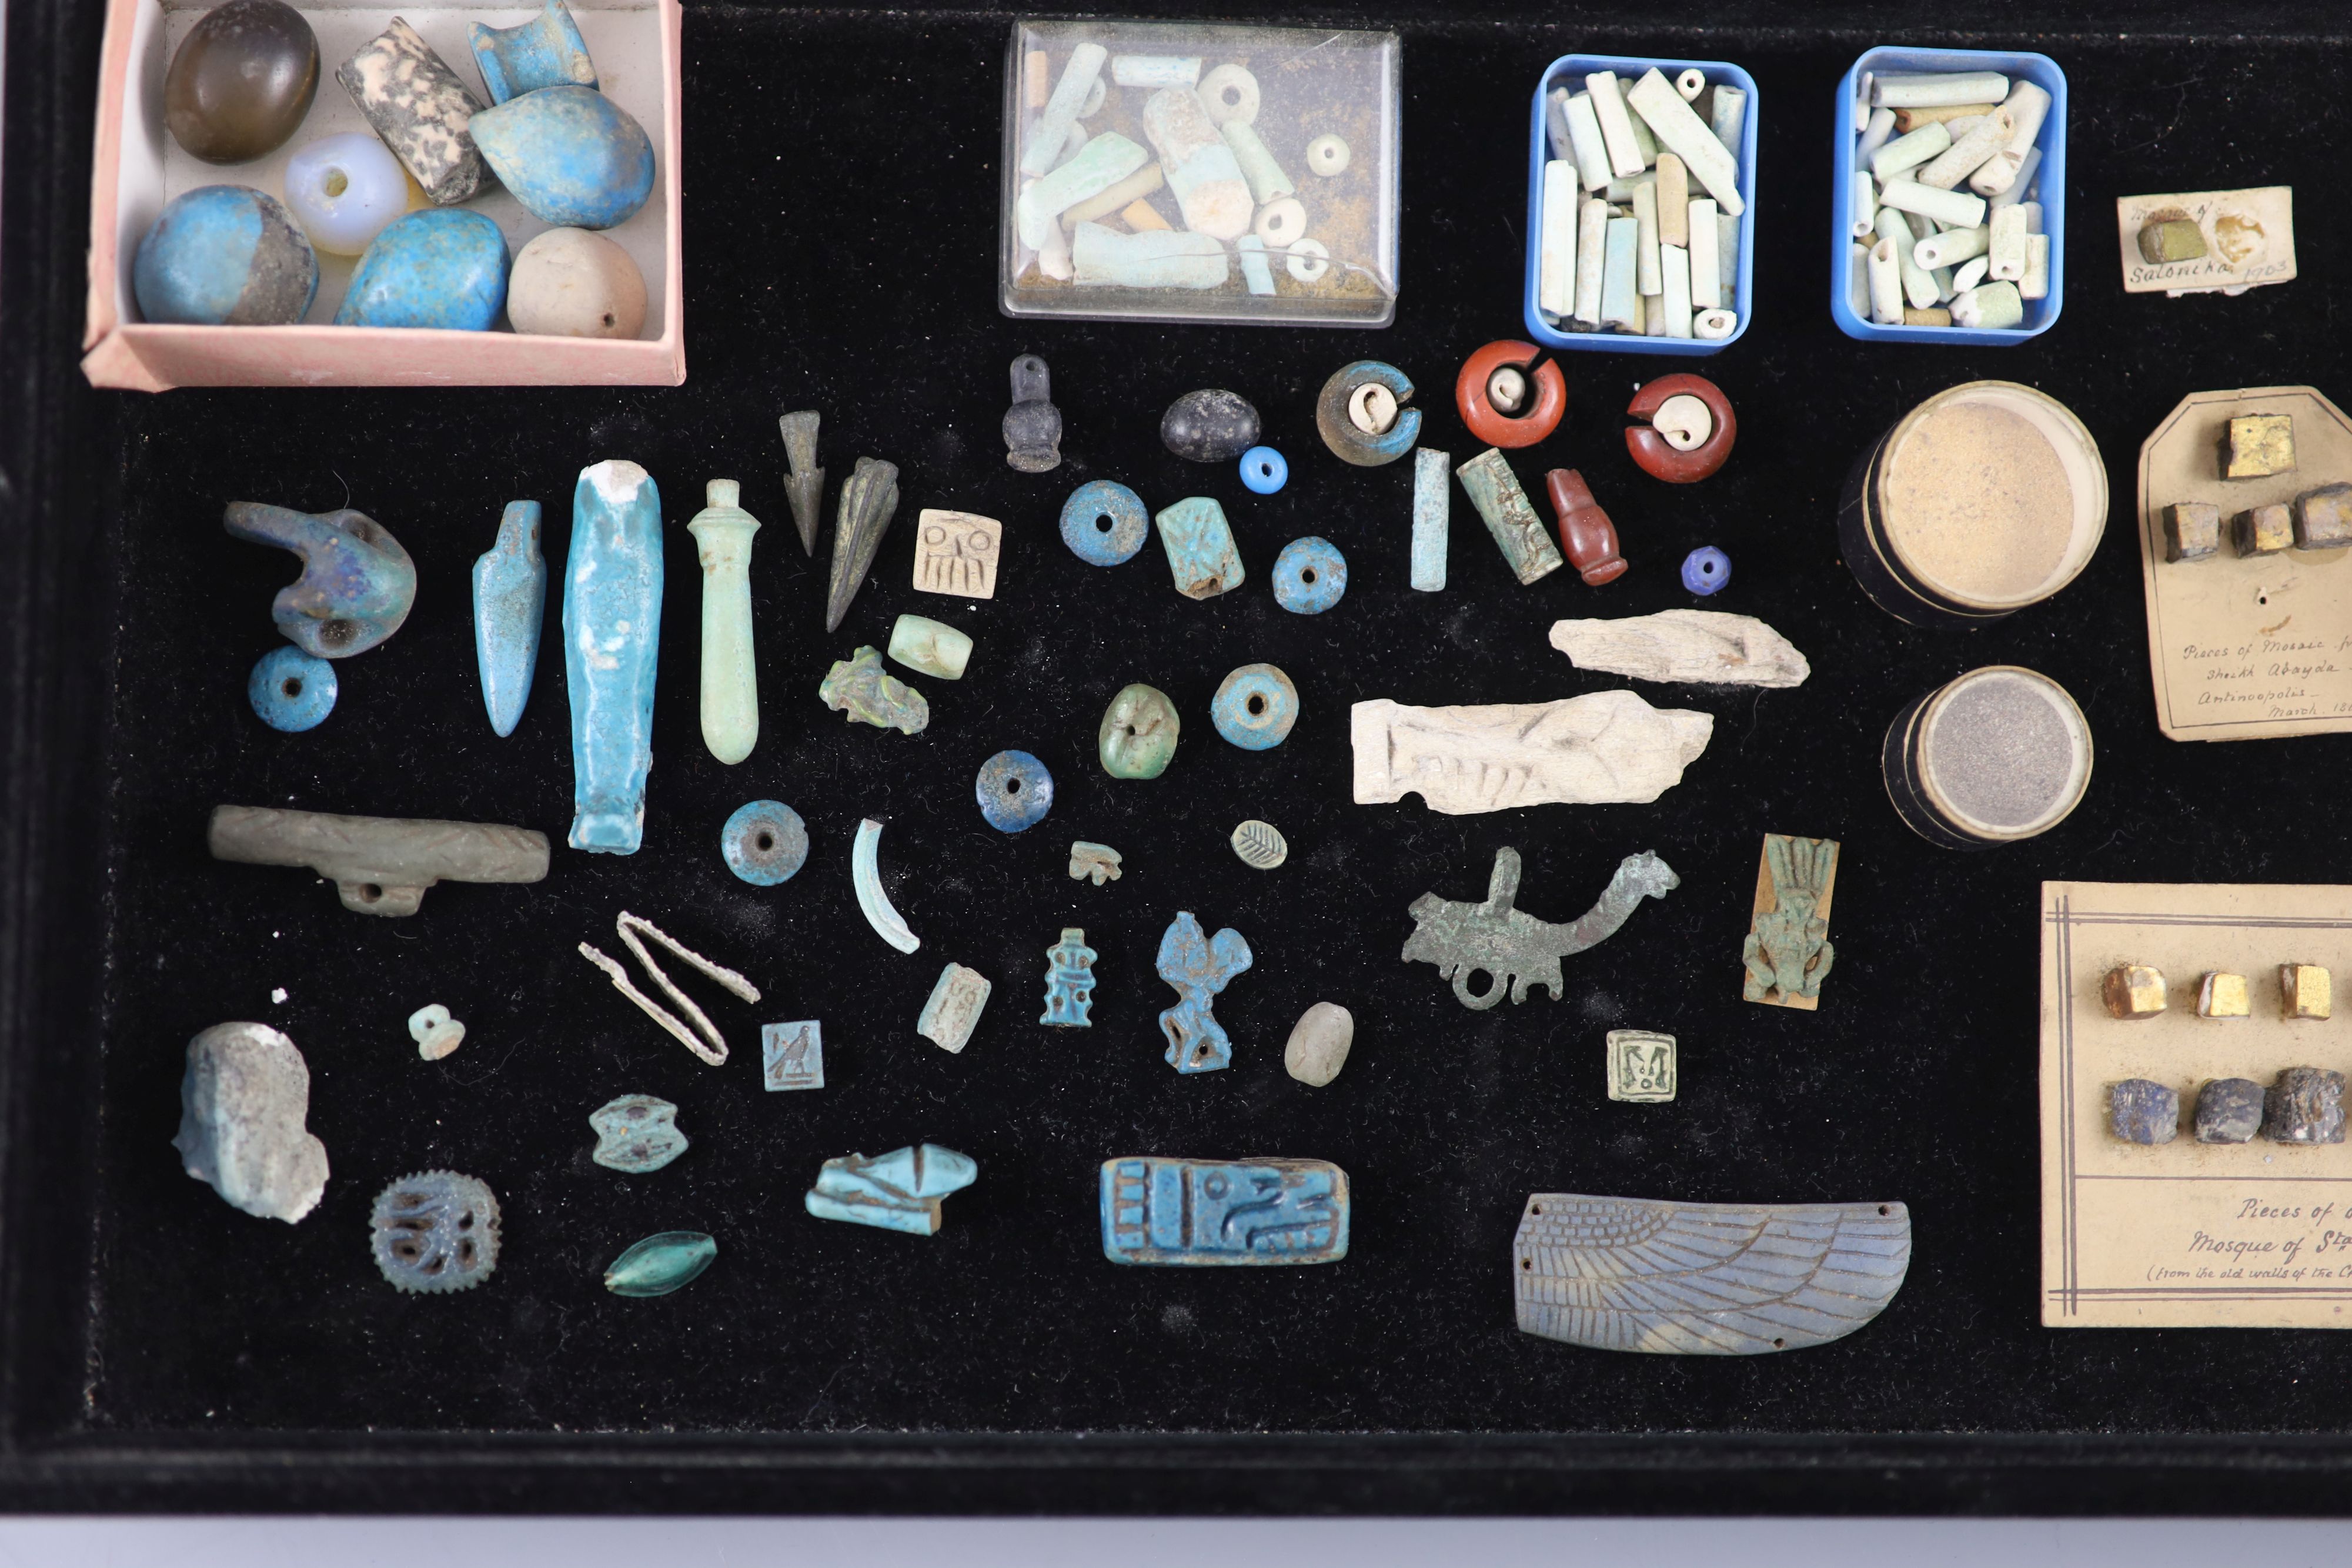 A group of Egyptian stone and turquoise glazed faience amulets, beads and fragments, late Kingdom to Roman period, Provenance - A. T. A